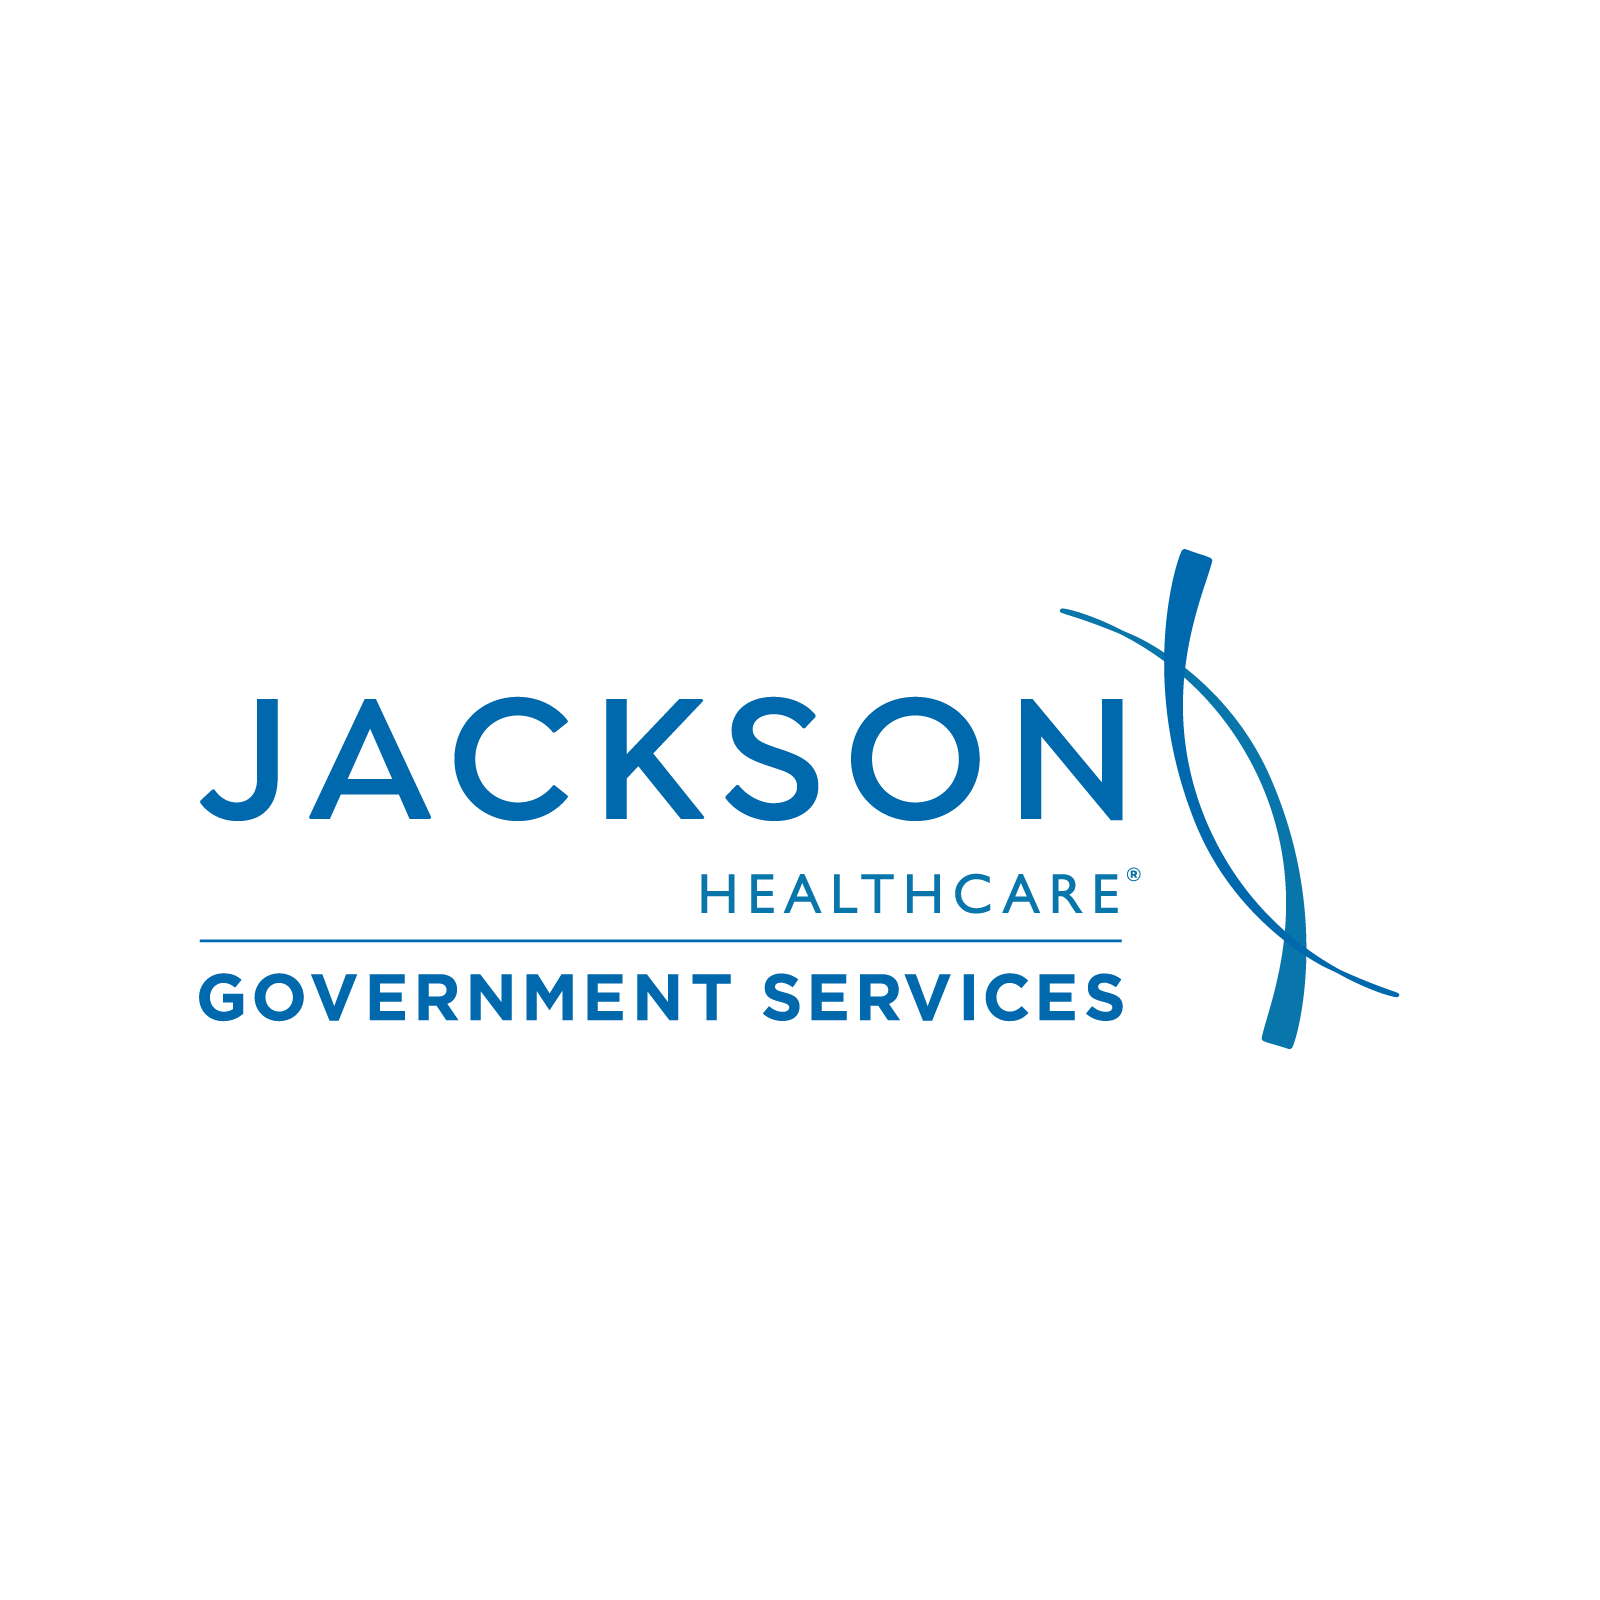 Jackson Healthcare Government Services